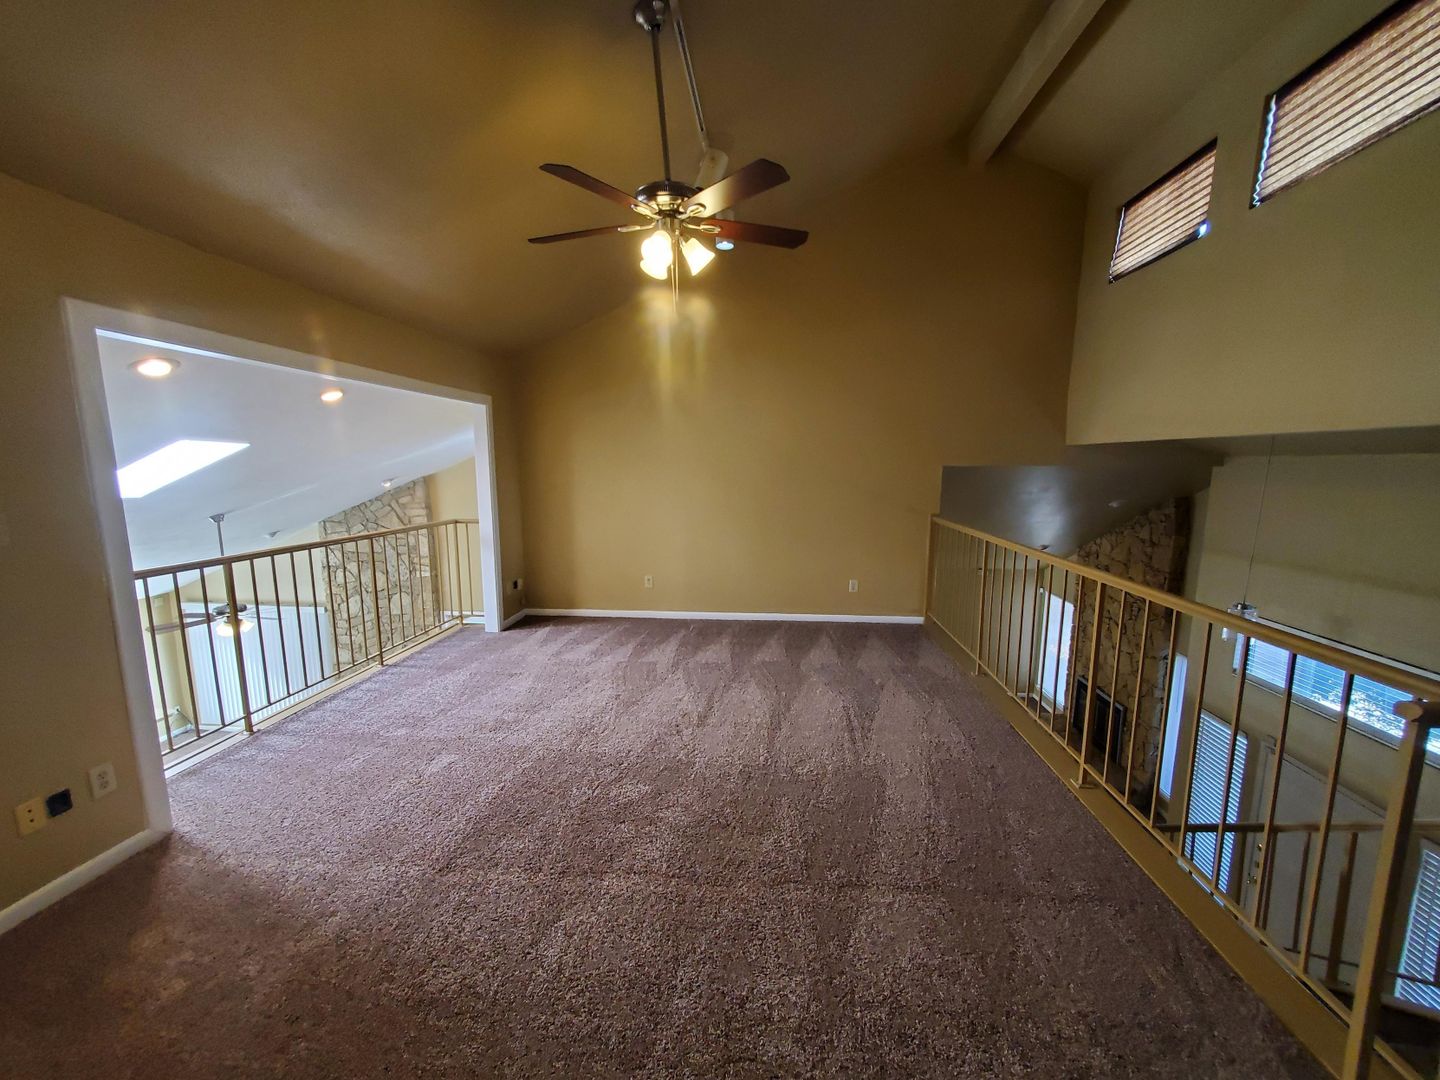 Spacious Plano Home with Swimming Pool!  A must see!